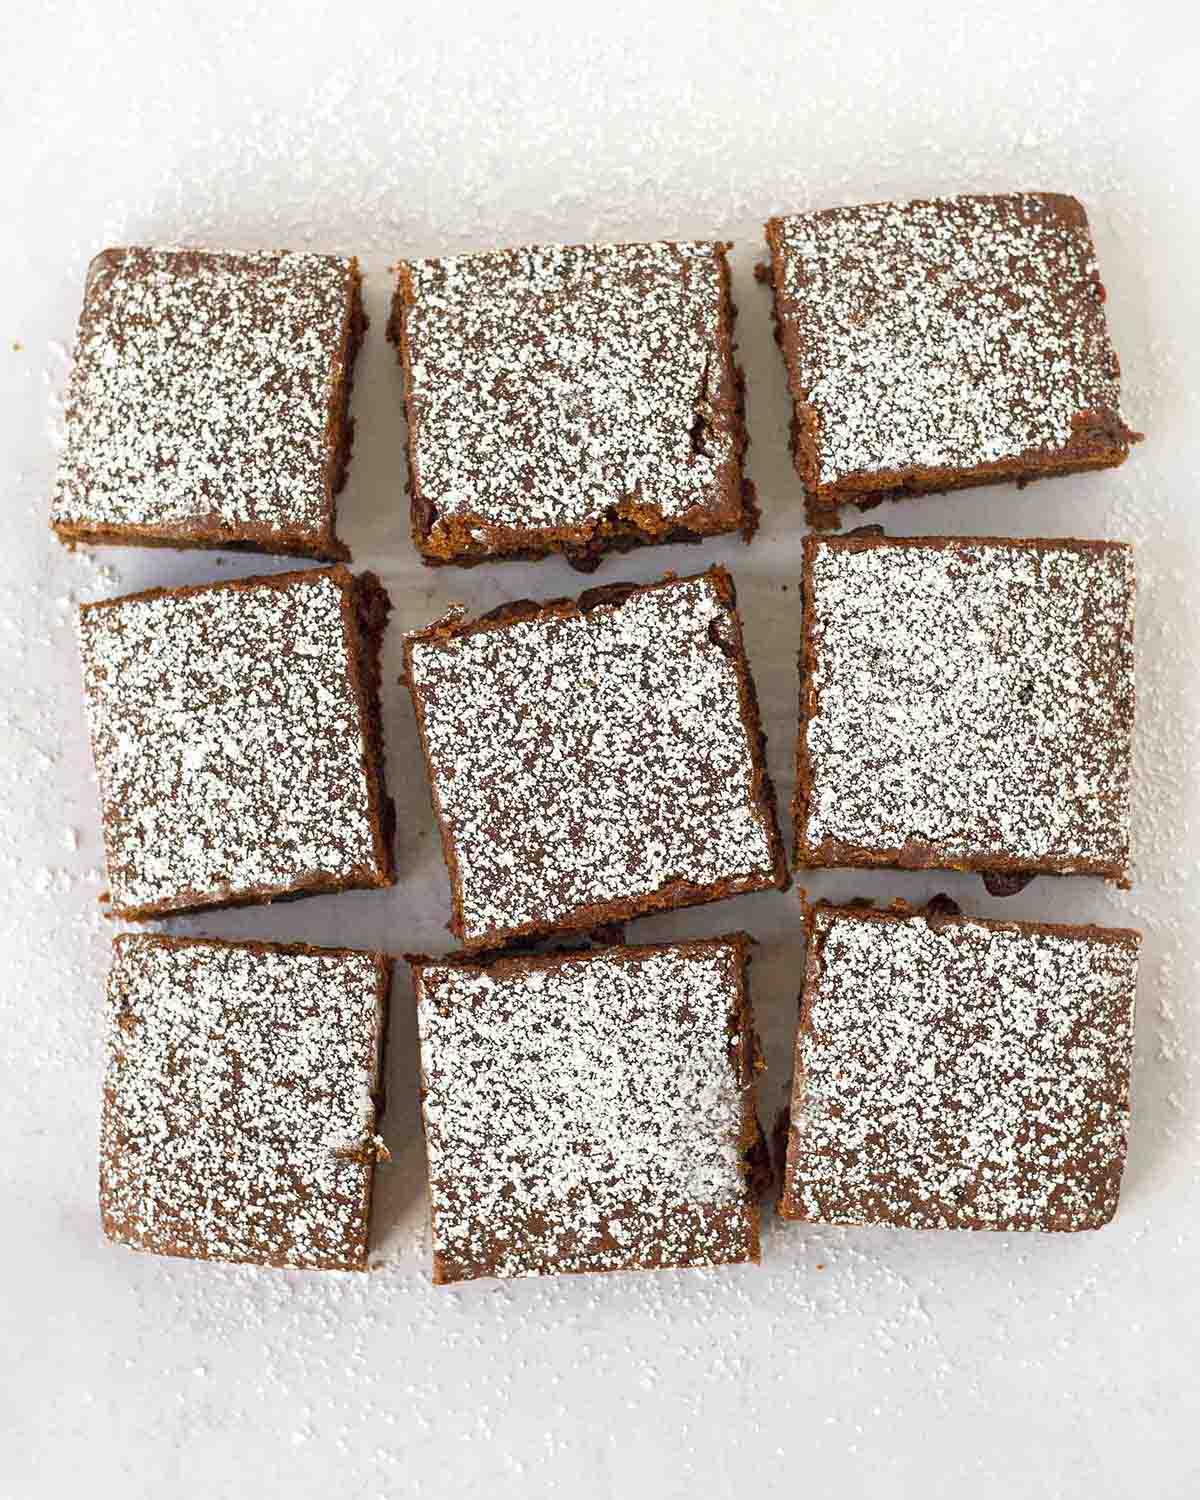 An overhead shot showing vegan applesauce cake sliced into squares with powdered sugar dusted on top.